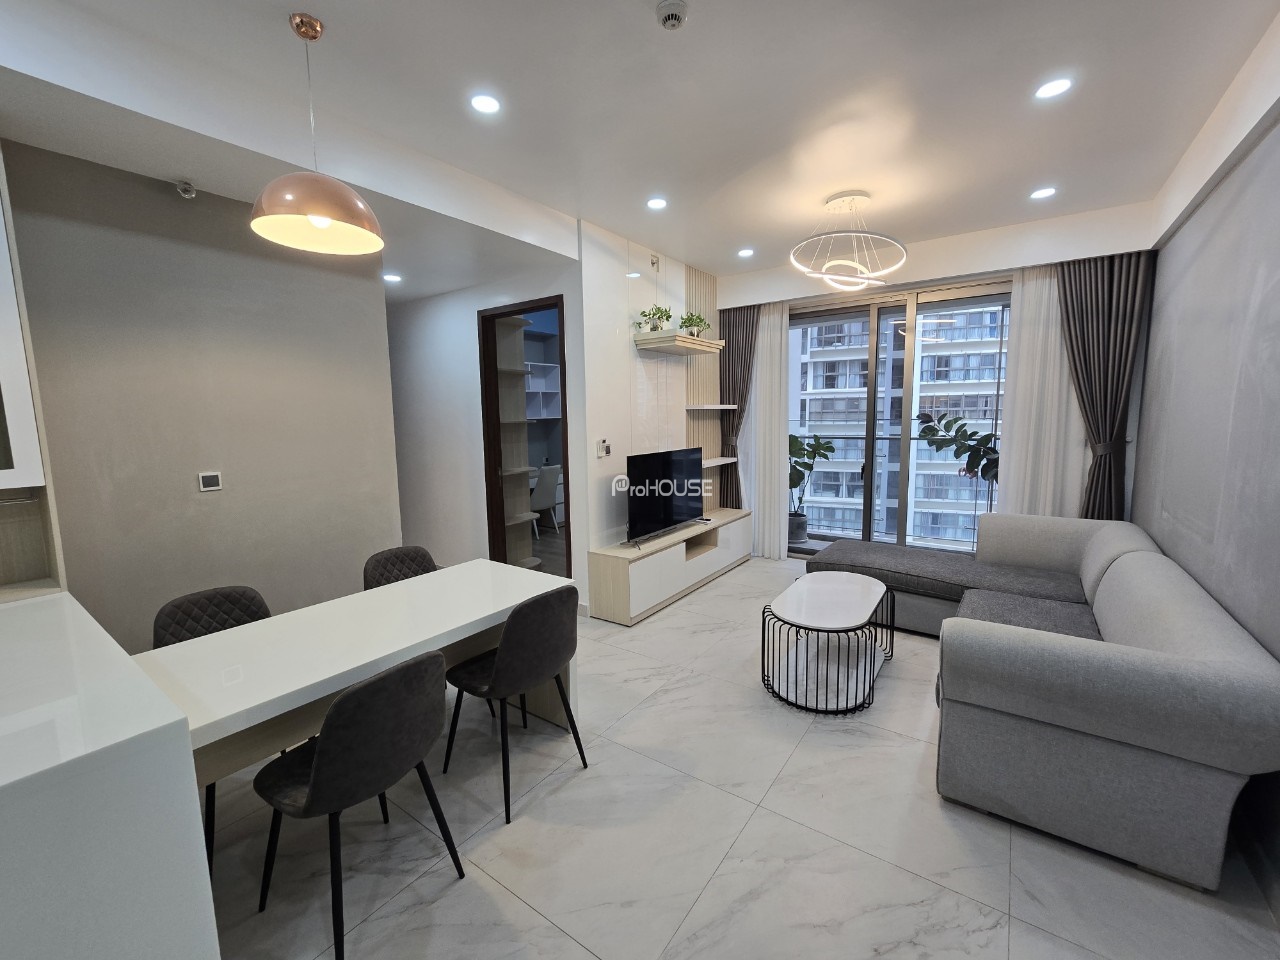 Modern and fully furnished 2 bedroom apartment for rent in Midtown Phu My Hung